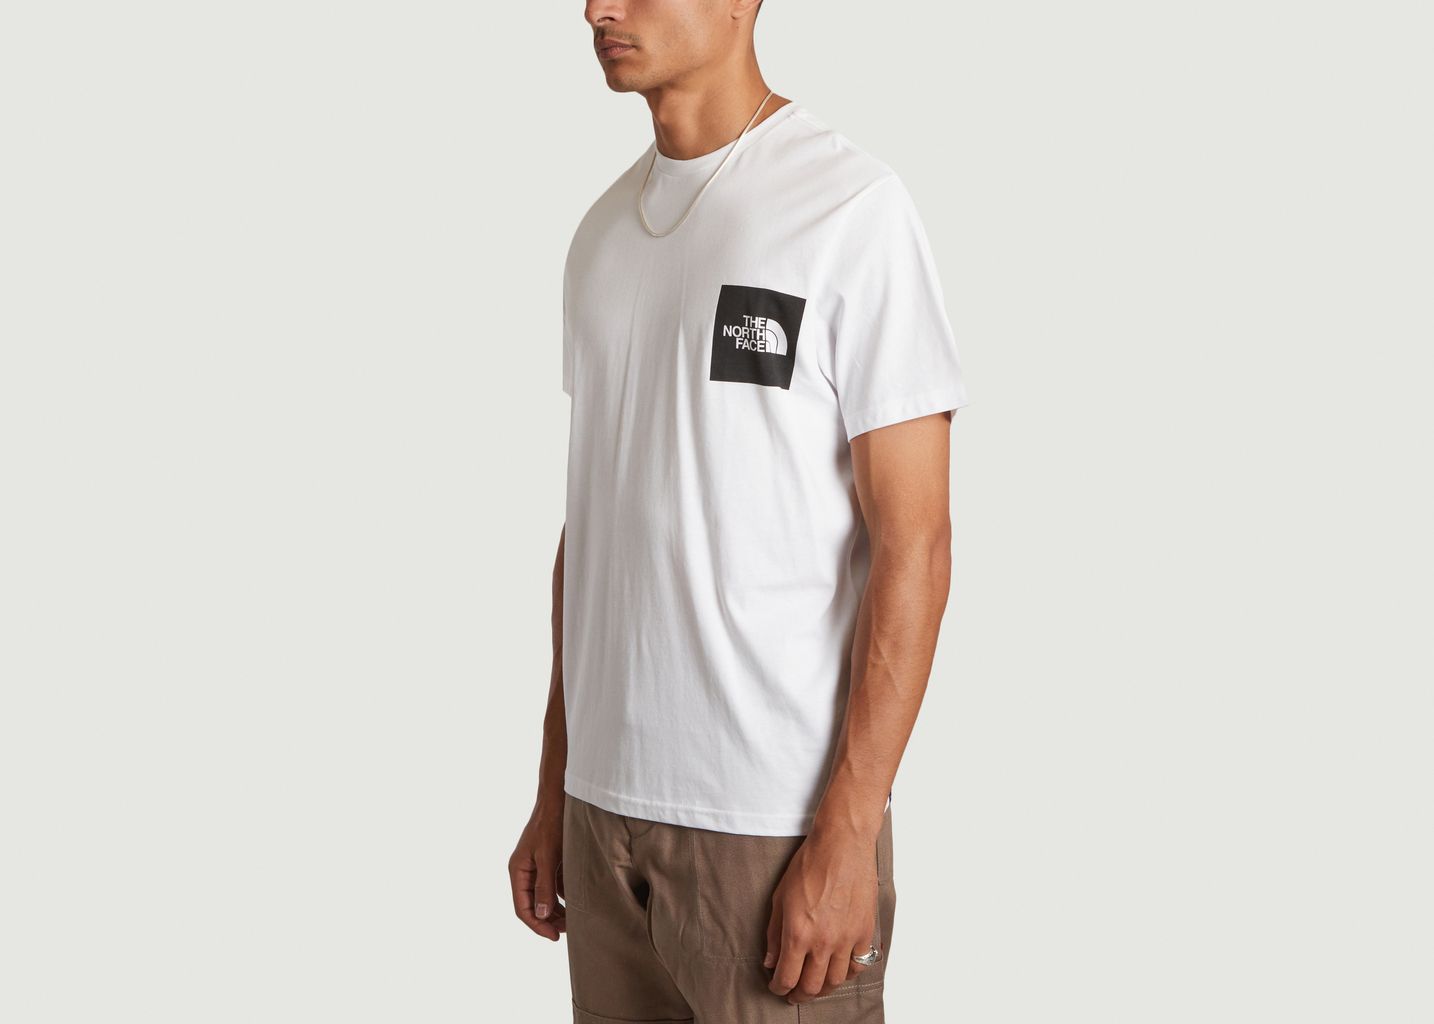 Galahm Graphic T-shirt - The North Face